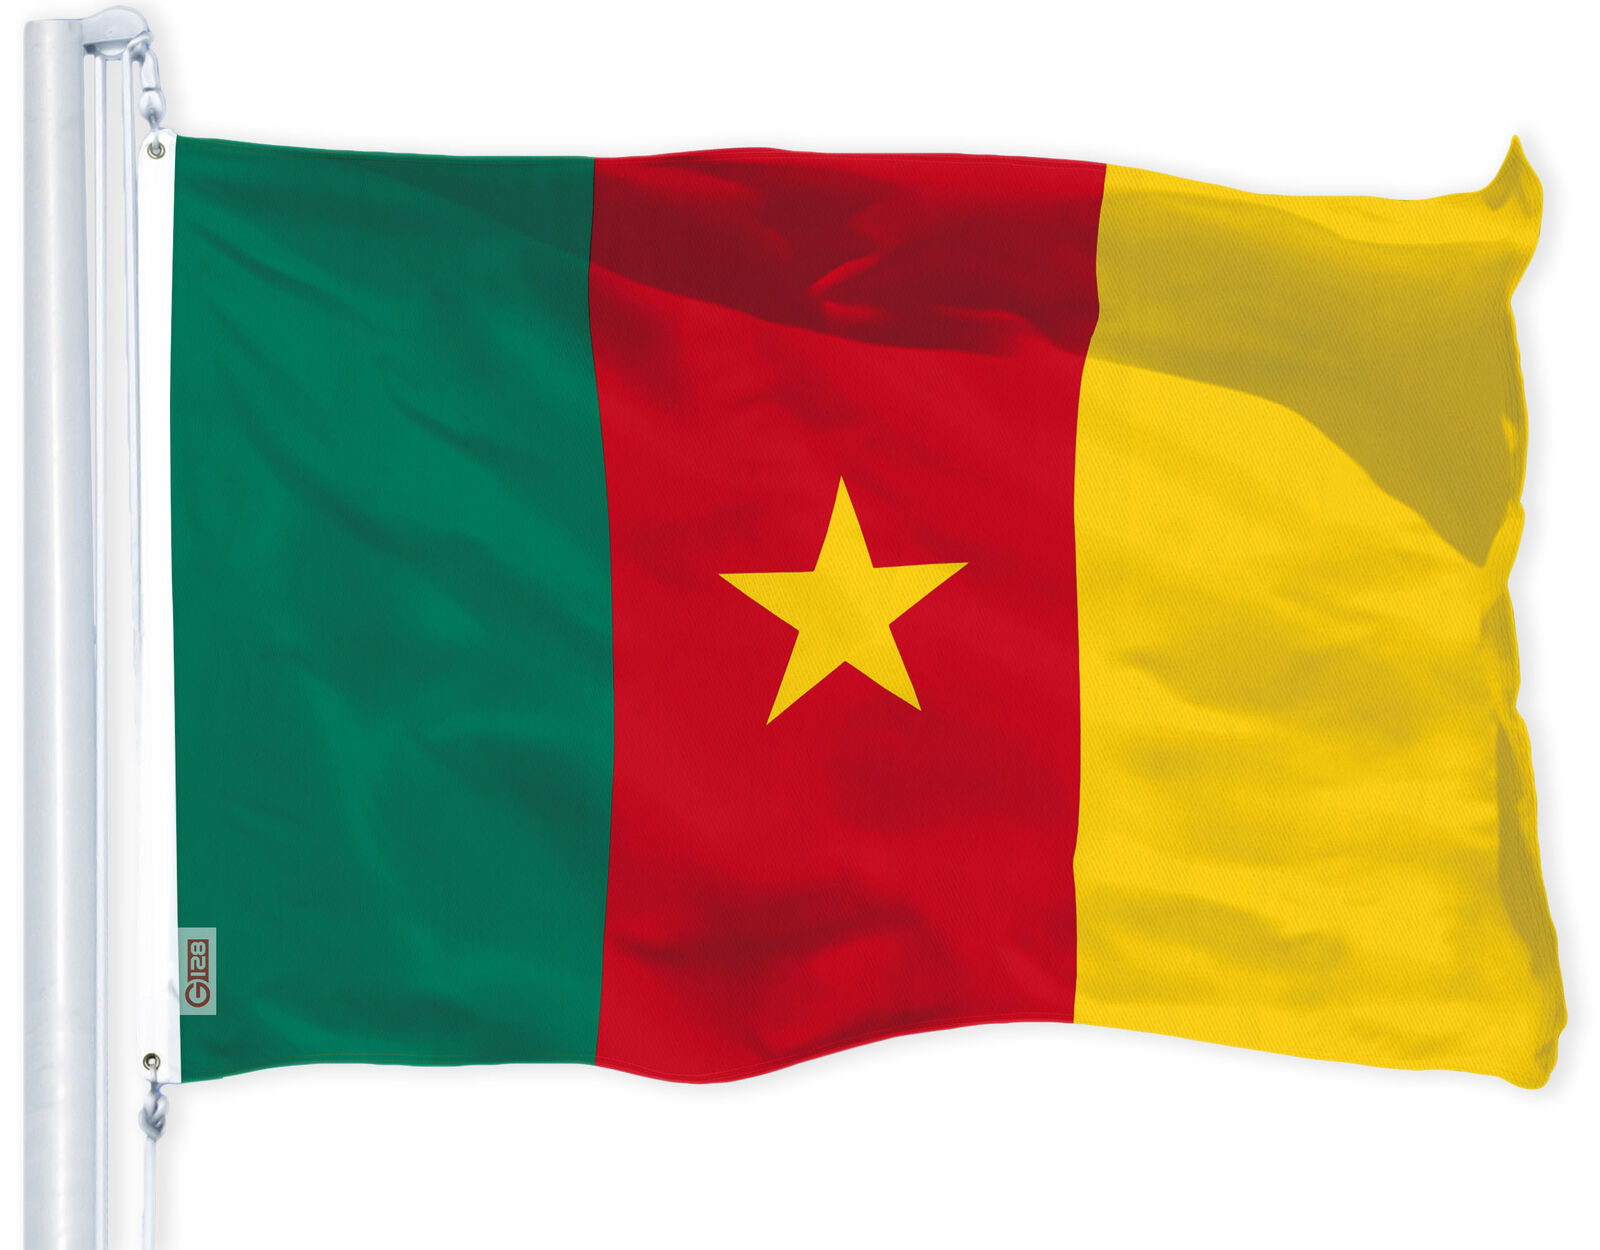 Cameroon Cameroonian Flag 3x5 FT Printed 150D Polyester By G128